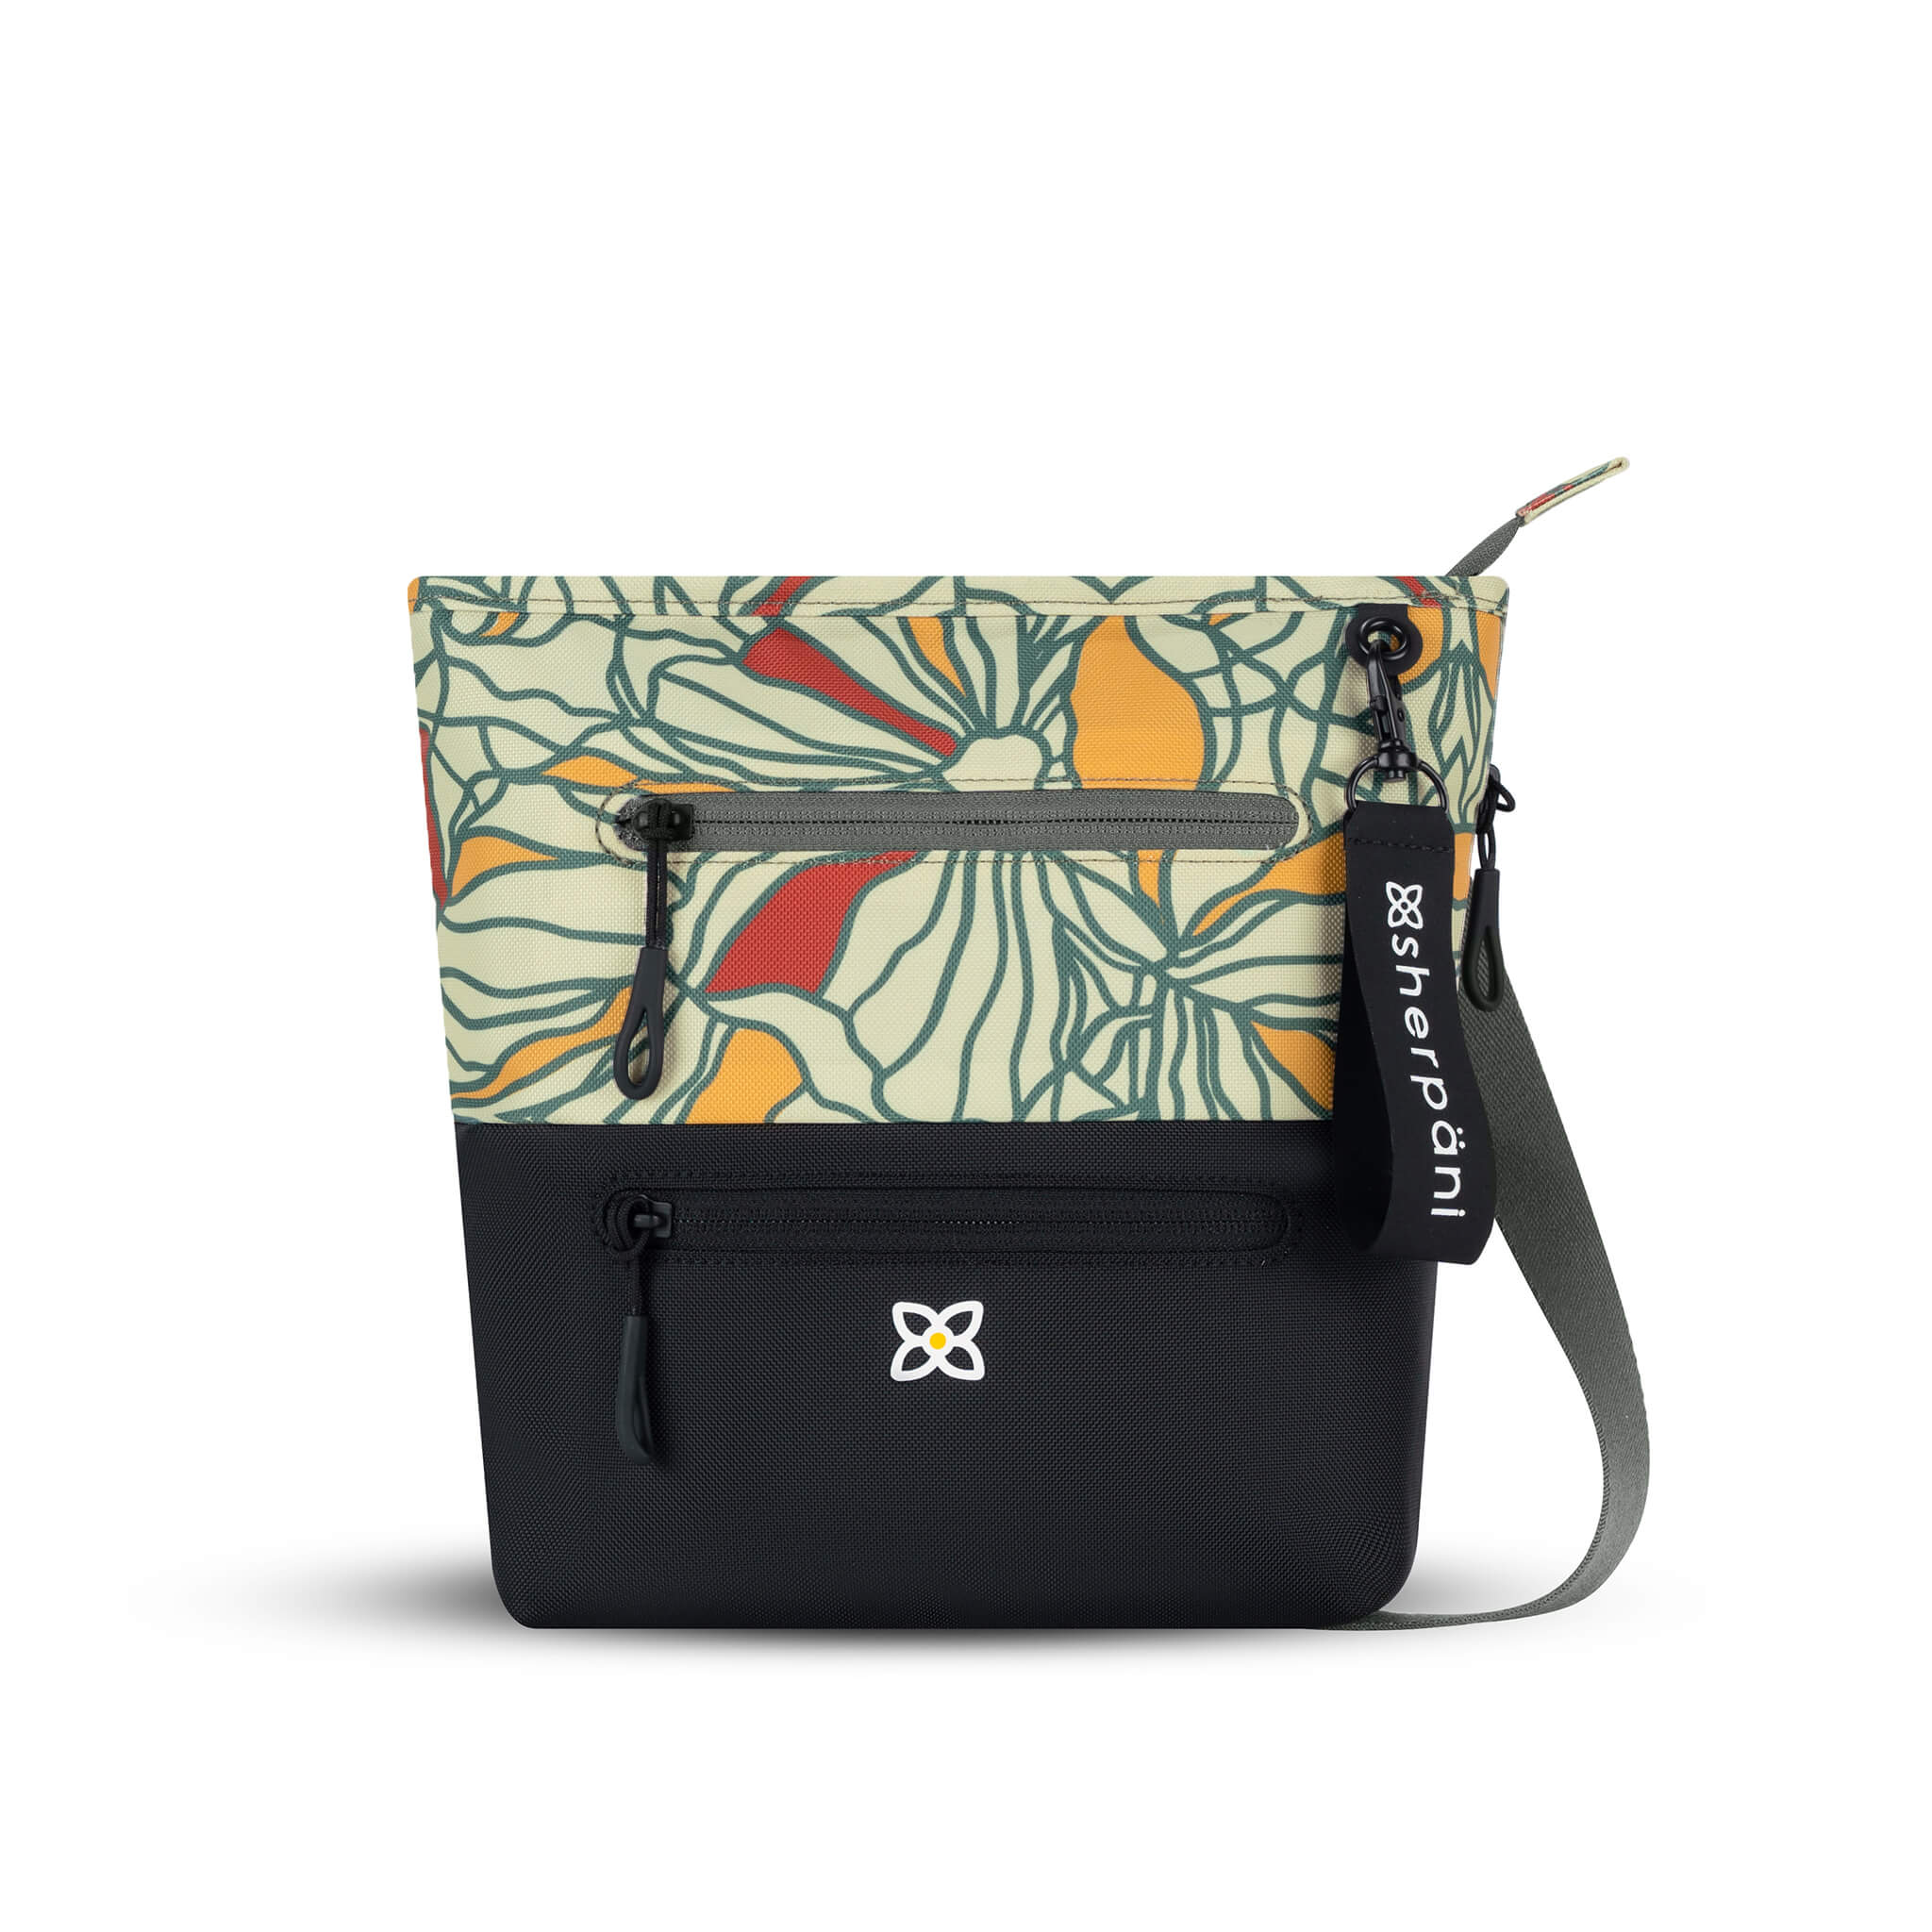 Flat front view of Sherpani crossbody travel bag, the Sadie in Fiori. Sadie features include two front zipper pockets, a discrete side pocket, detachable keychain, adjustable crossbody strap, back slip pocket and RFID blocking technology. The Fiori colorway is two-toned in black and a floral pattern with red accents. 